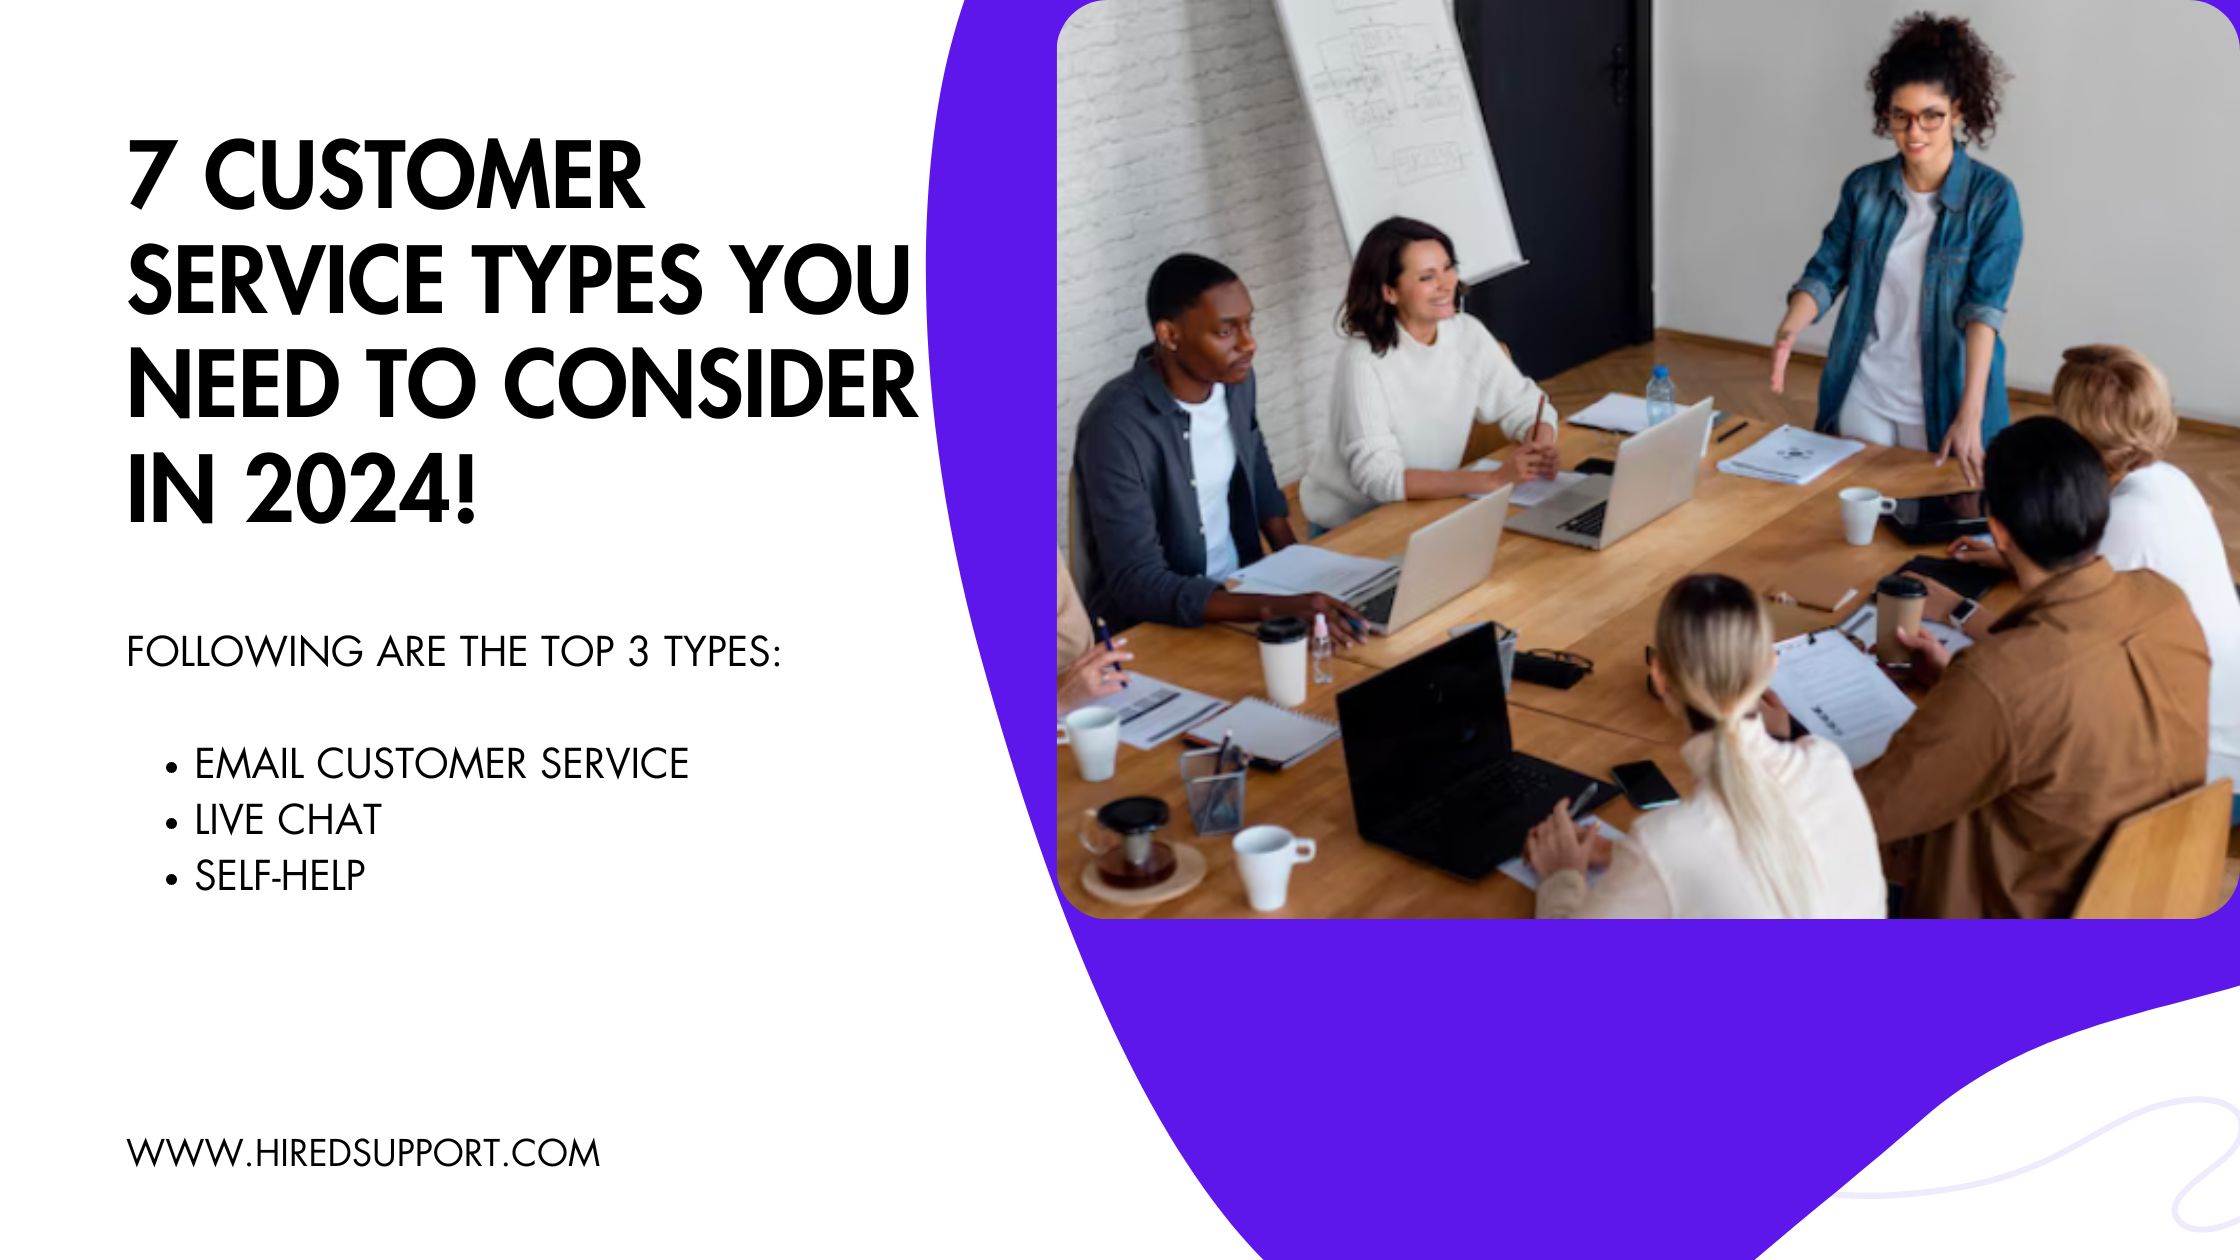 7 Customer Service Types You Need to Consider in 2024!